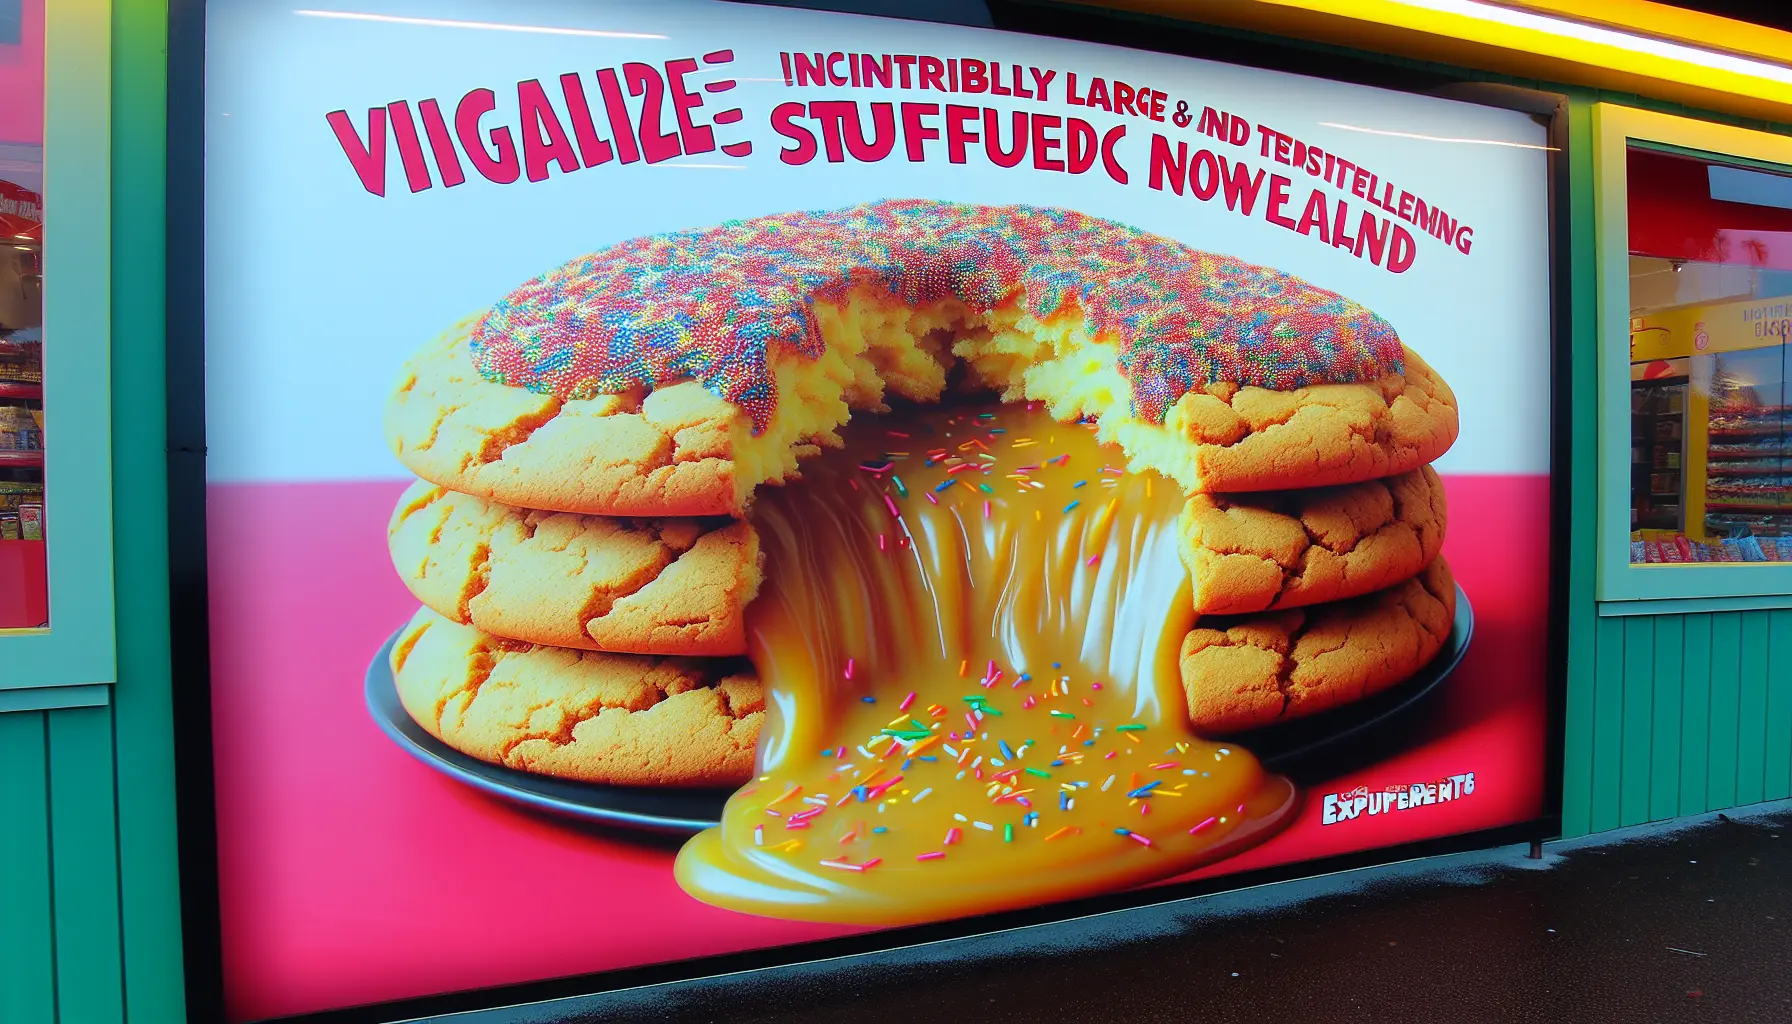 Taste the Delight with NZ’s Largest Stuffed Cookies